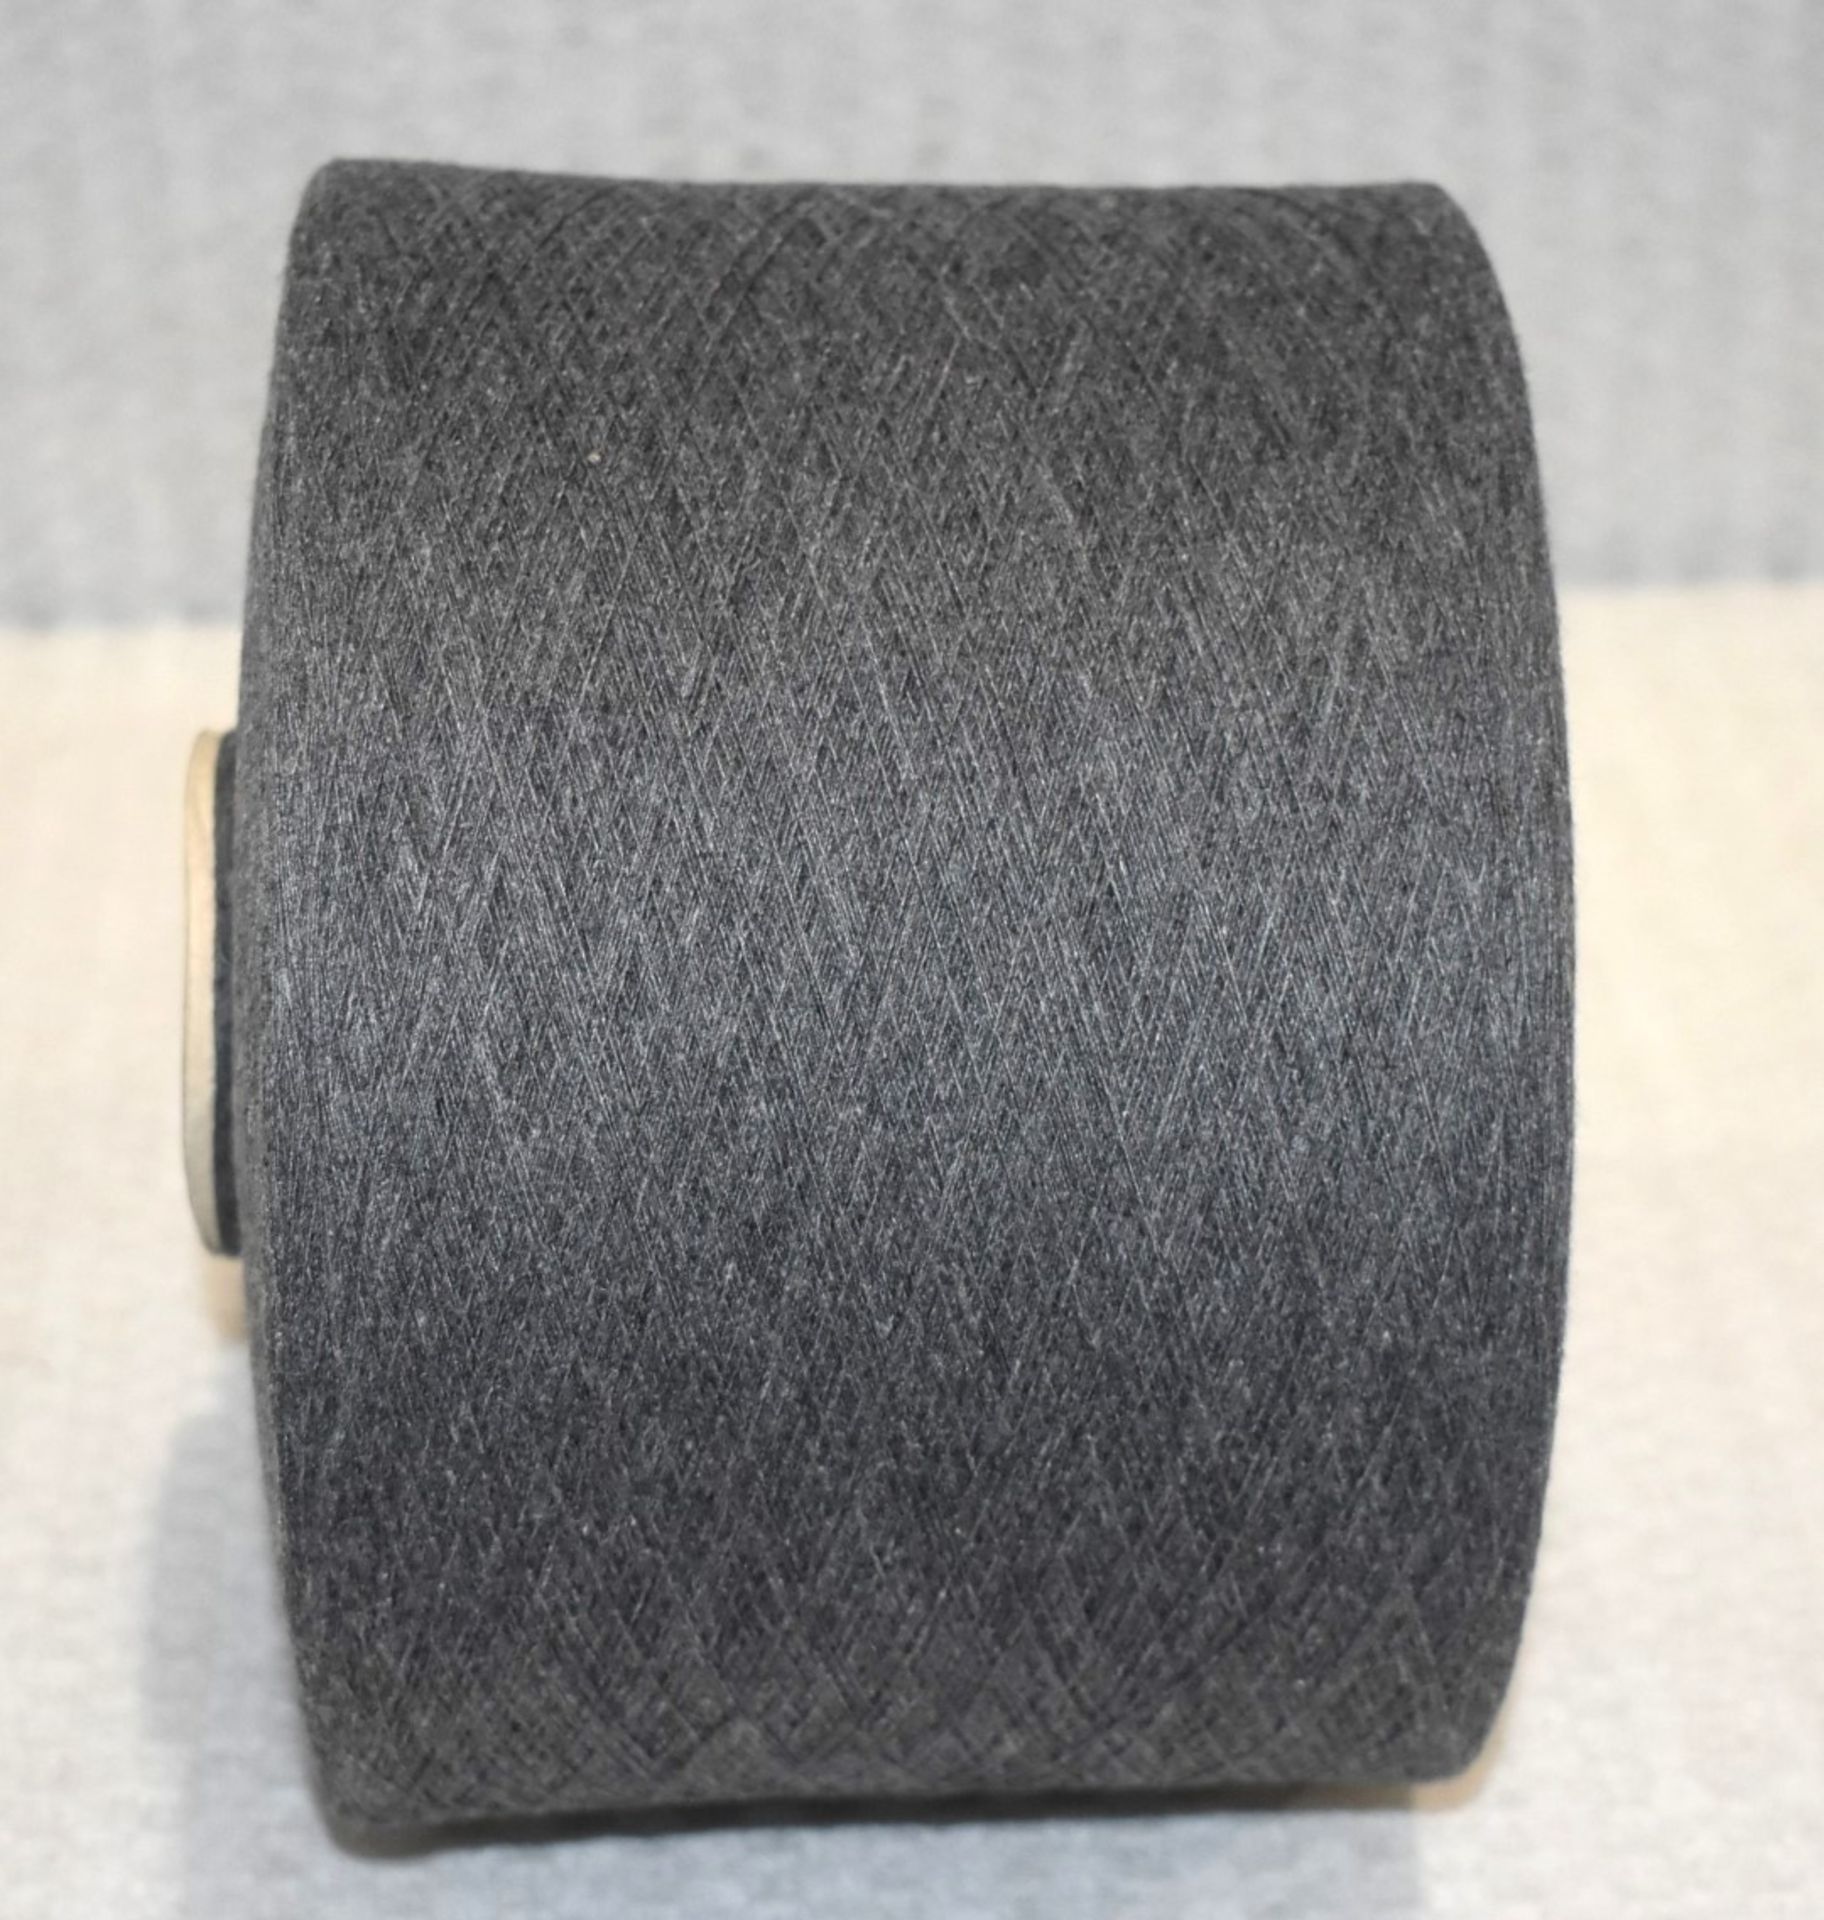 10 x Cones of 1/13 MicroCotton Knitting Yarn - Mid Grey - Approx Weight: 2,500g - New Stock ABL Yarn - Image 16 of 17